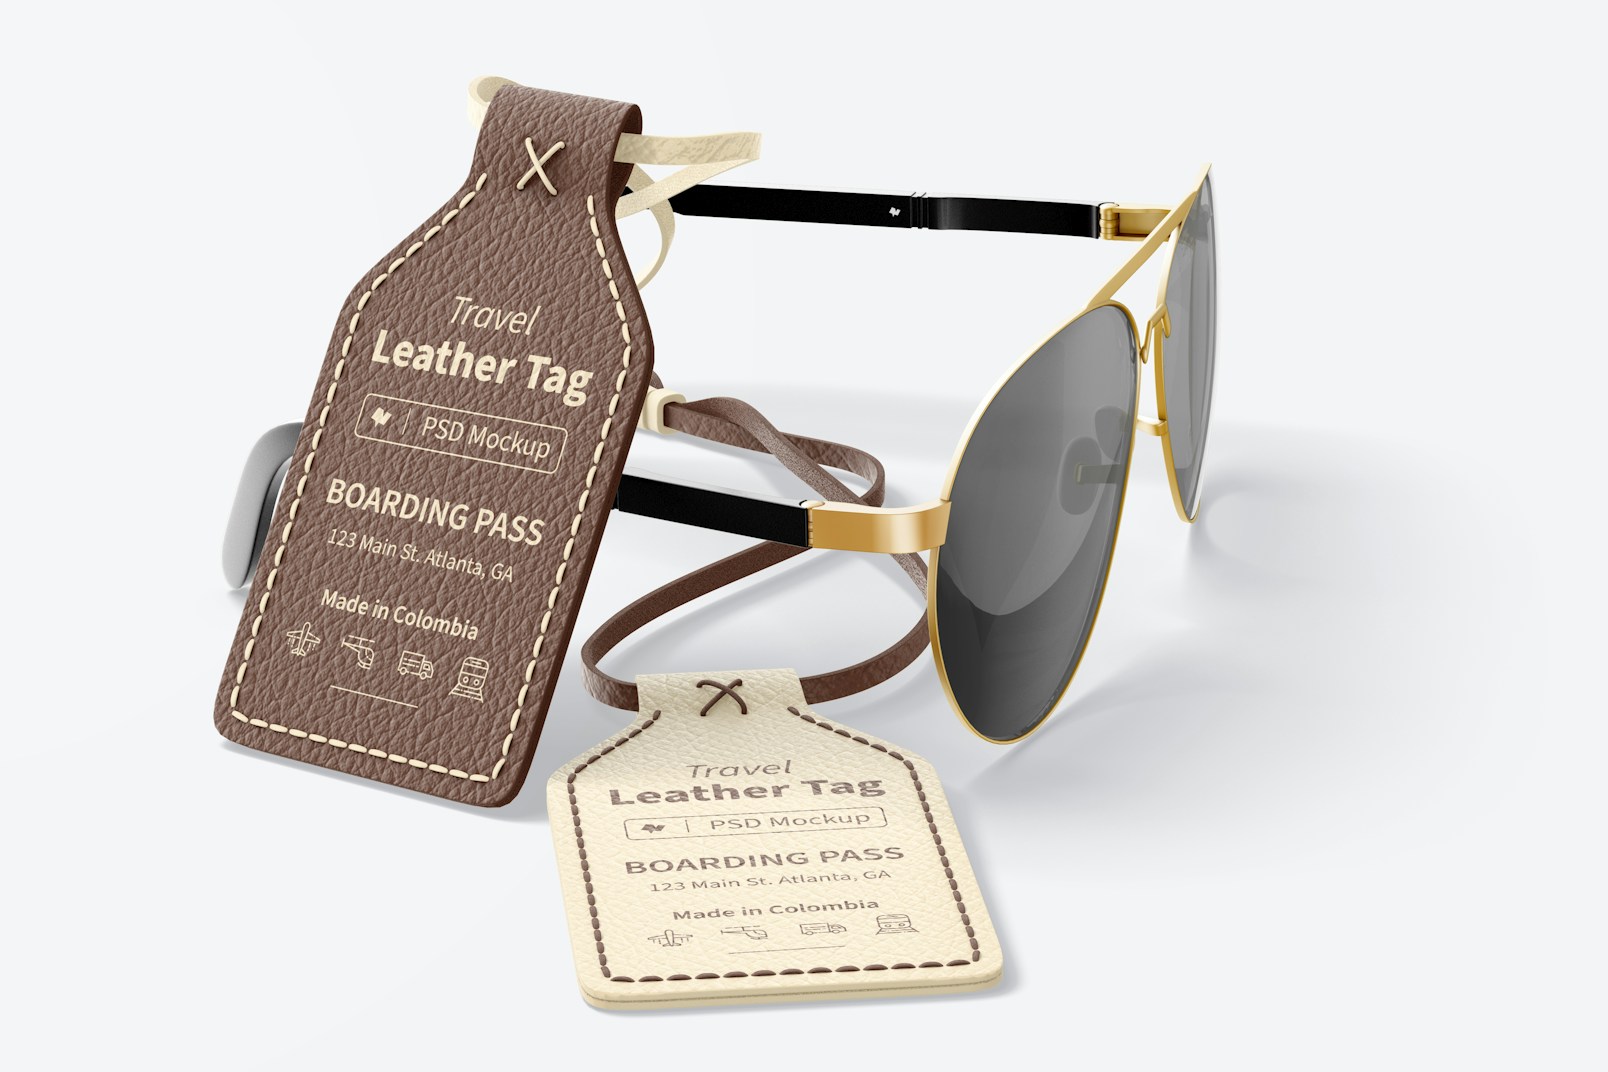 Travel Leather Tag Mockup, with Glasses